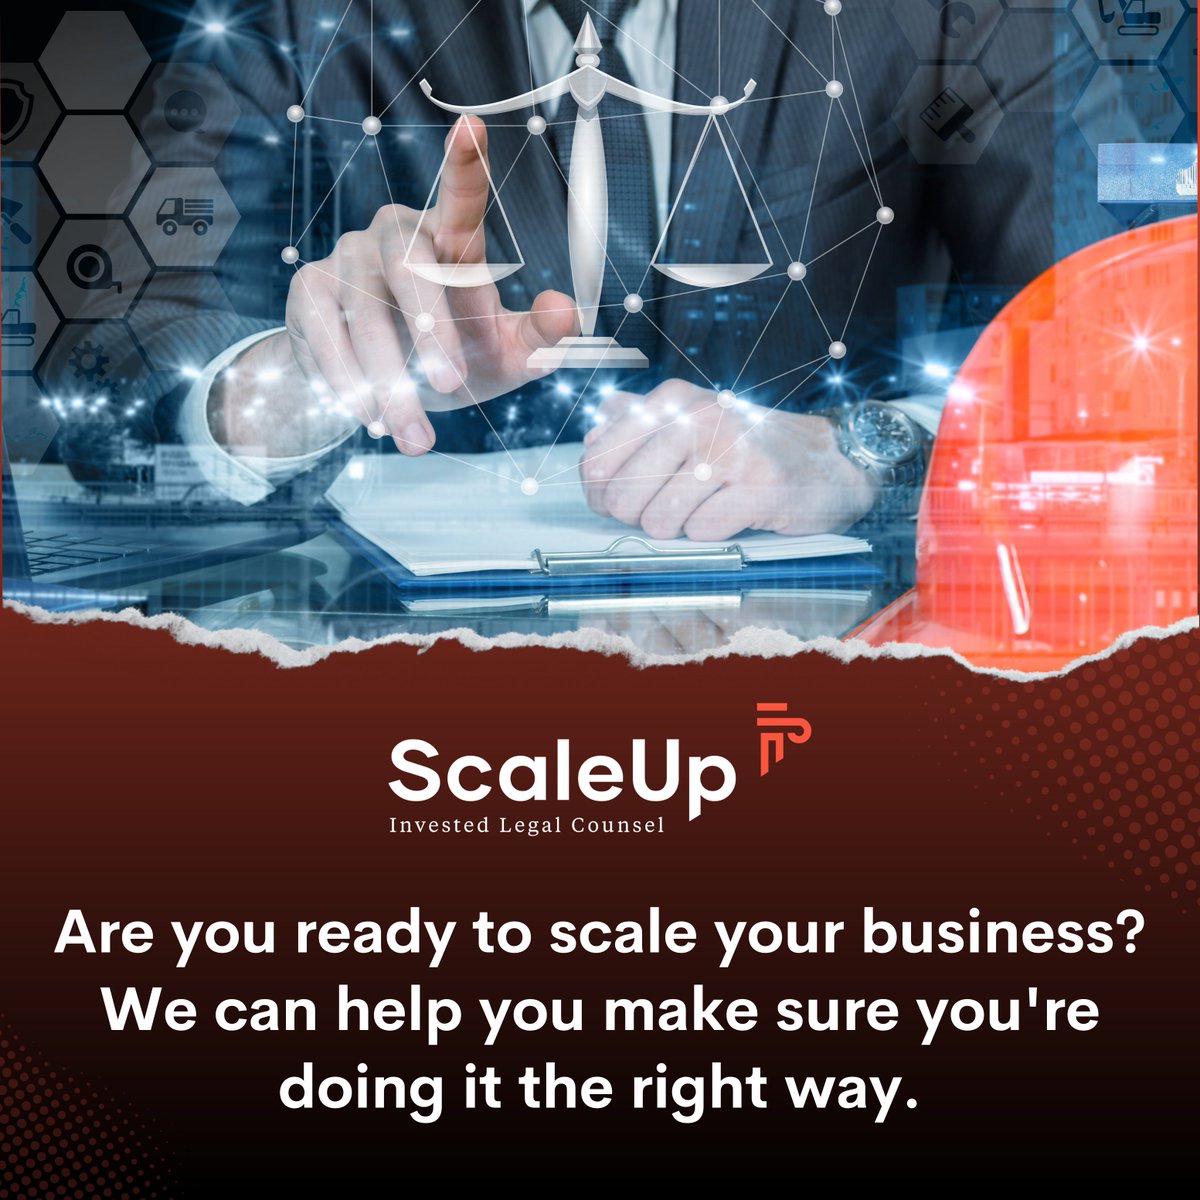 We are your trusted partners in growth, ensuring every step is taken the right way. 

#LegalSolutions #StartupSuccess #StartupSupport #LegalServices #LegalExperts #ScaleupLegal #LegalGuidance #BusinessSuccess #ScaleYourBusiness